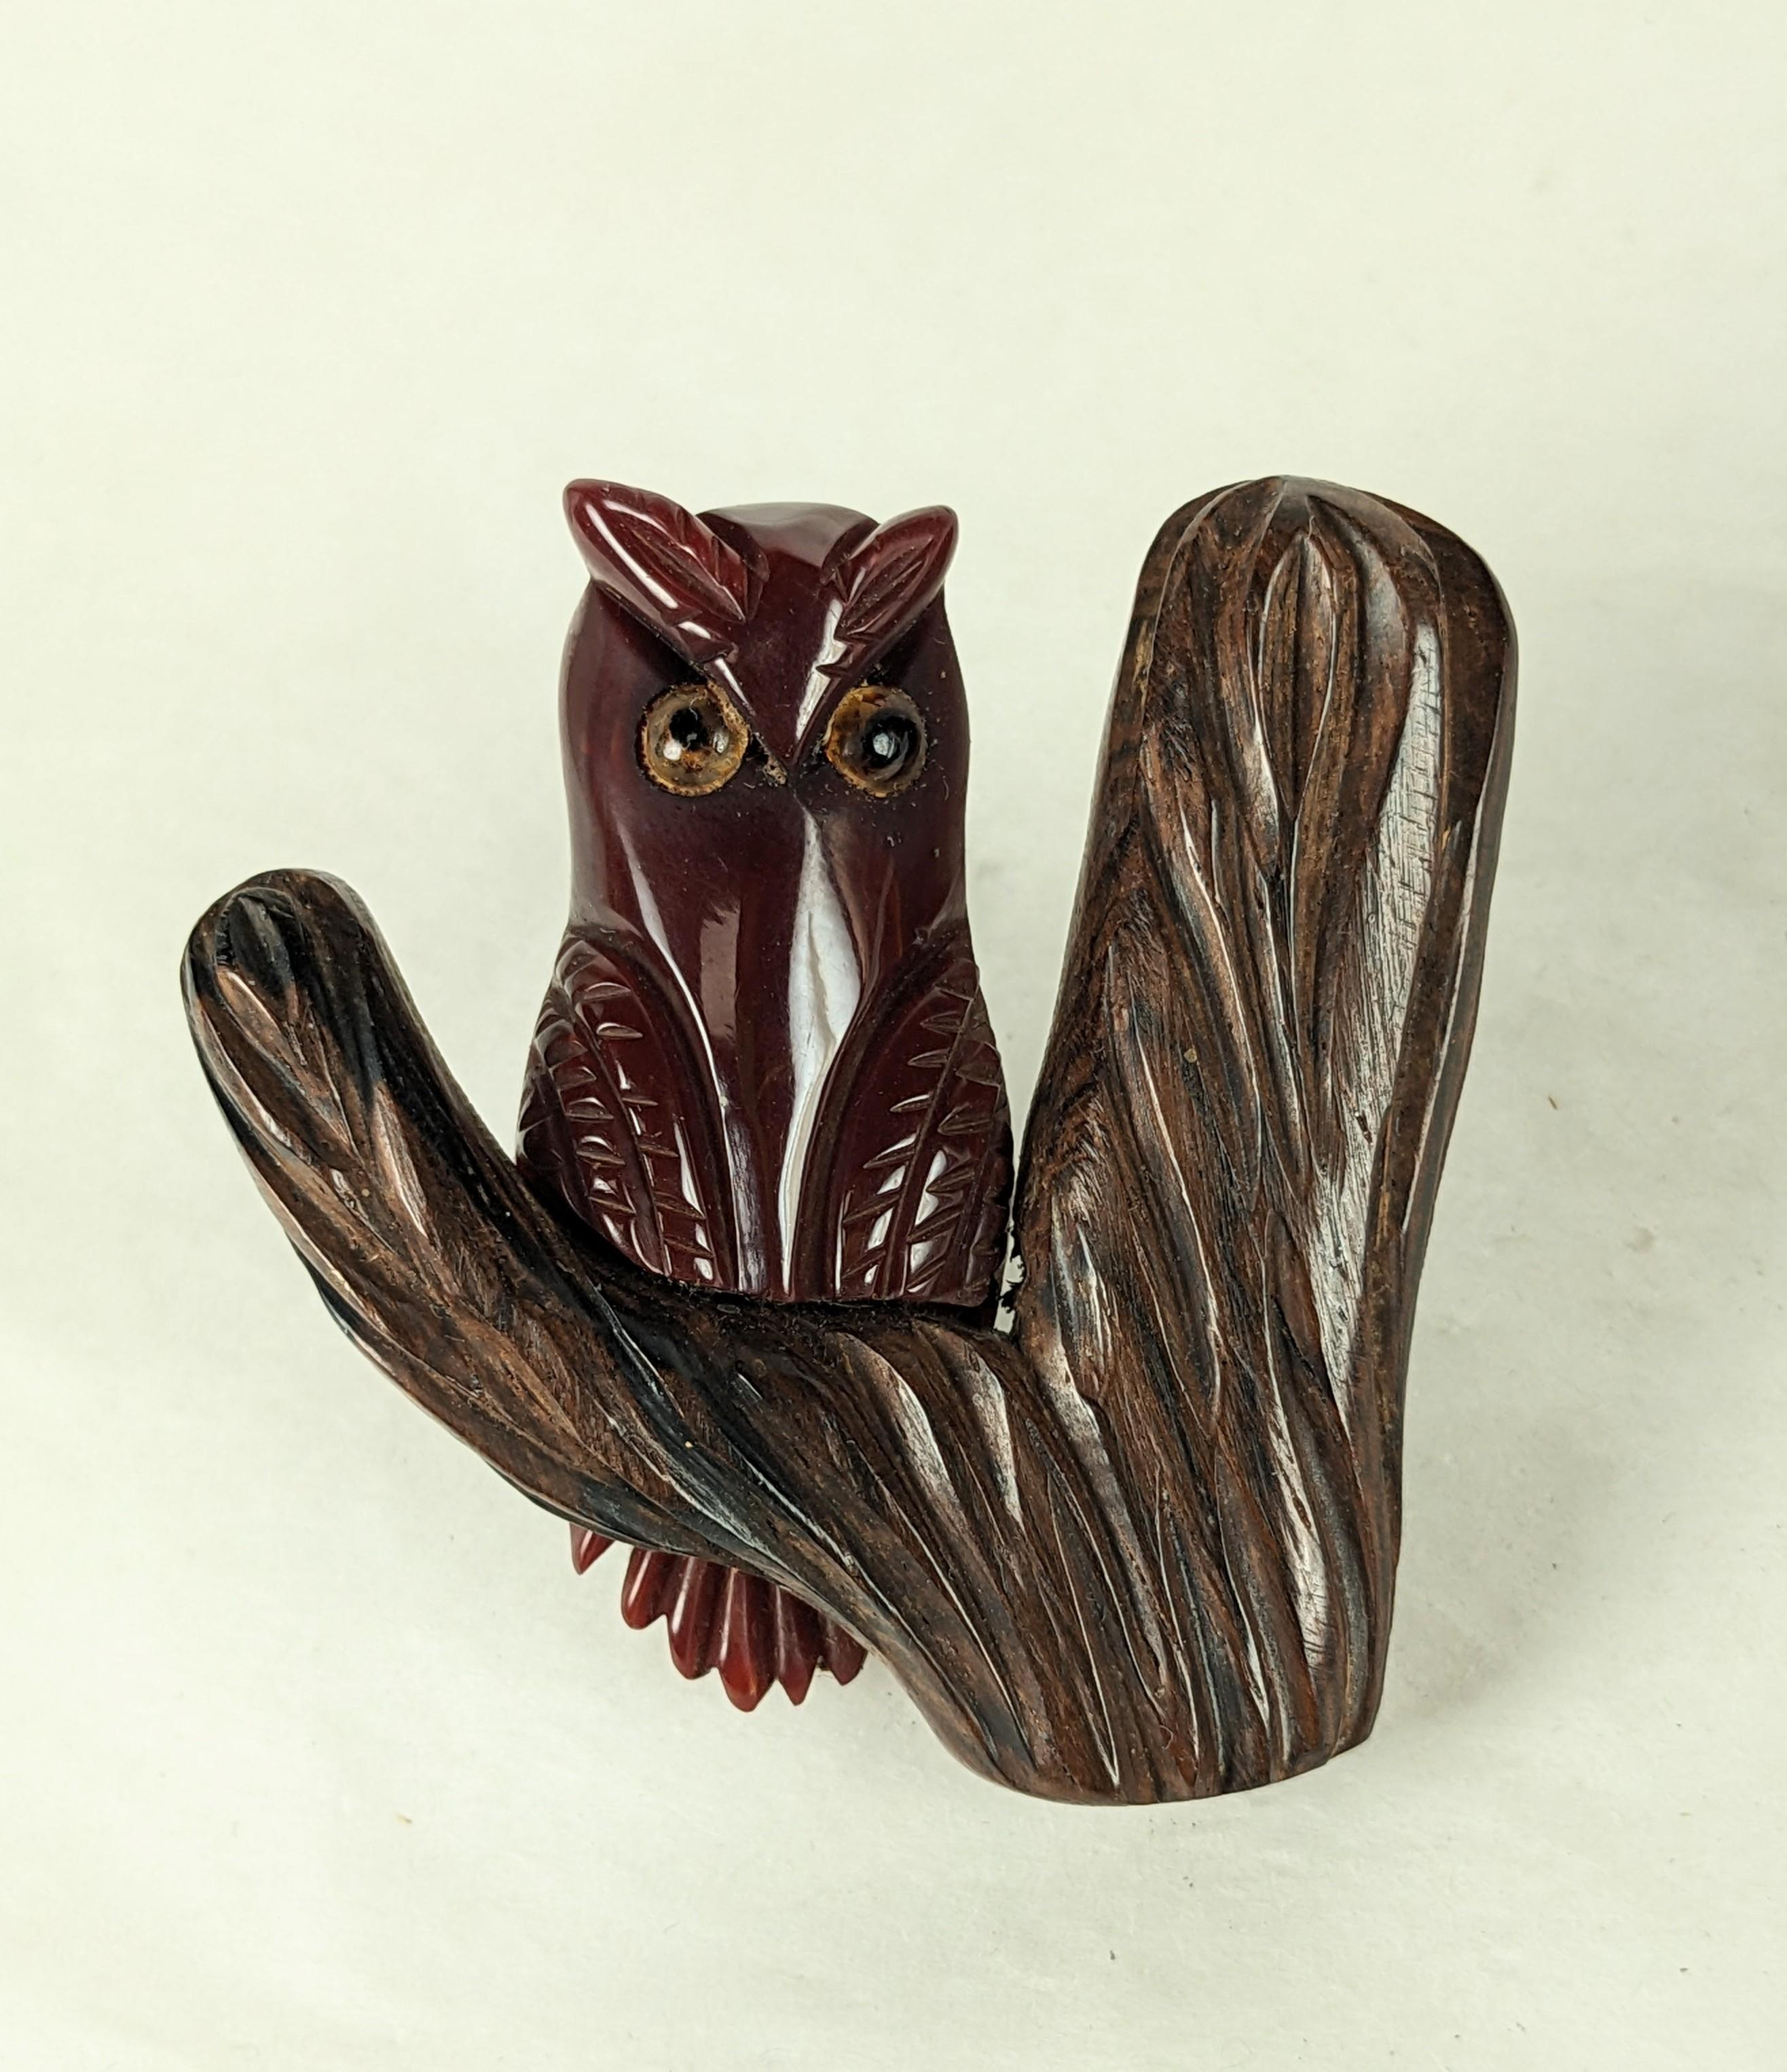 Charming Art Deco Bakelite Owl on Branch from the 1930's. Hand carved maroon bakelite owl with glass eyes is perched on a carved wood tree. American folk art jewelry. 2